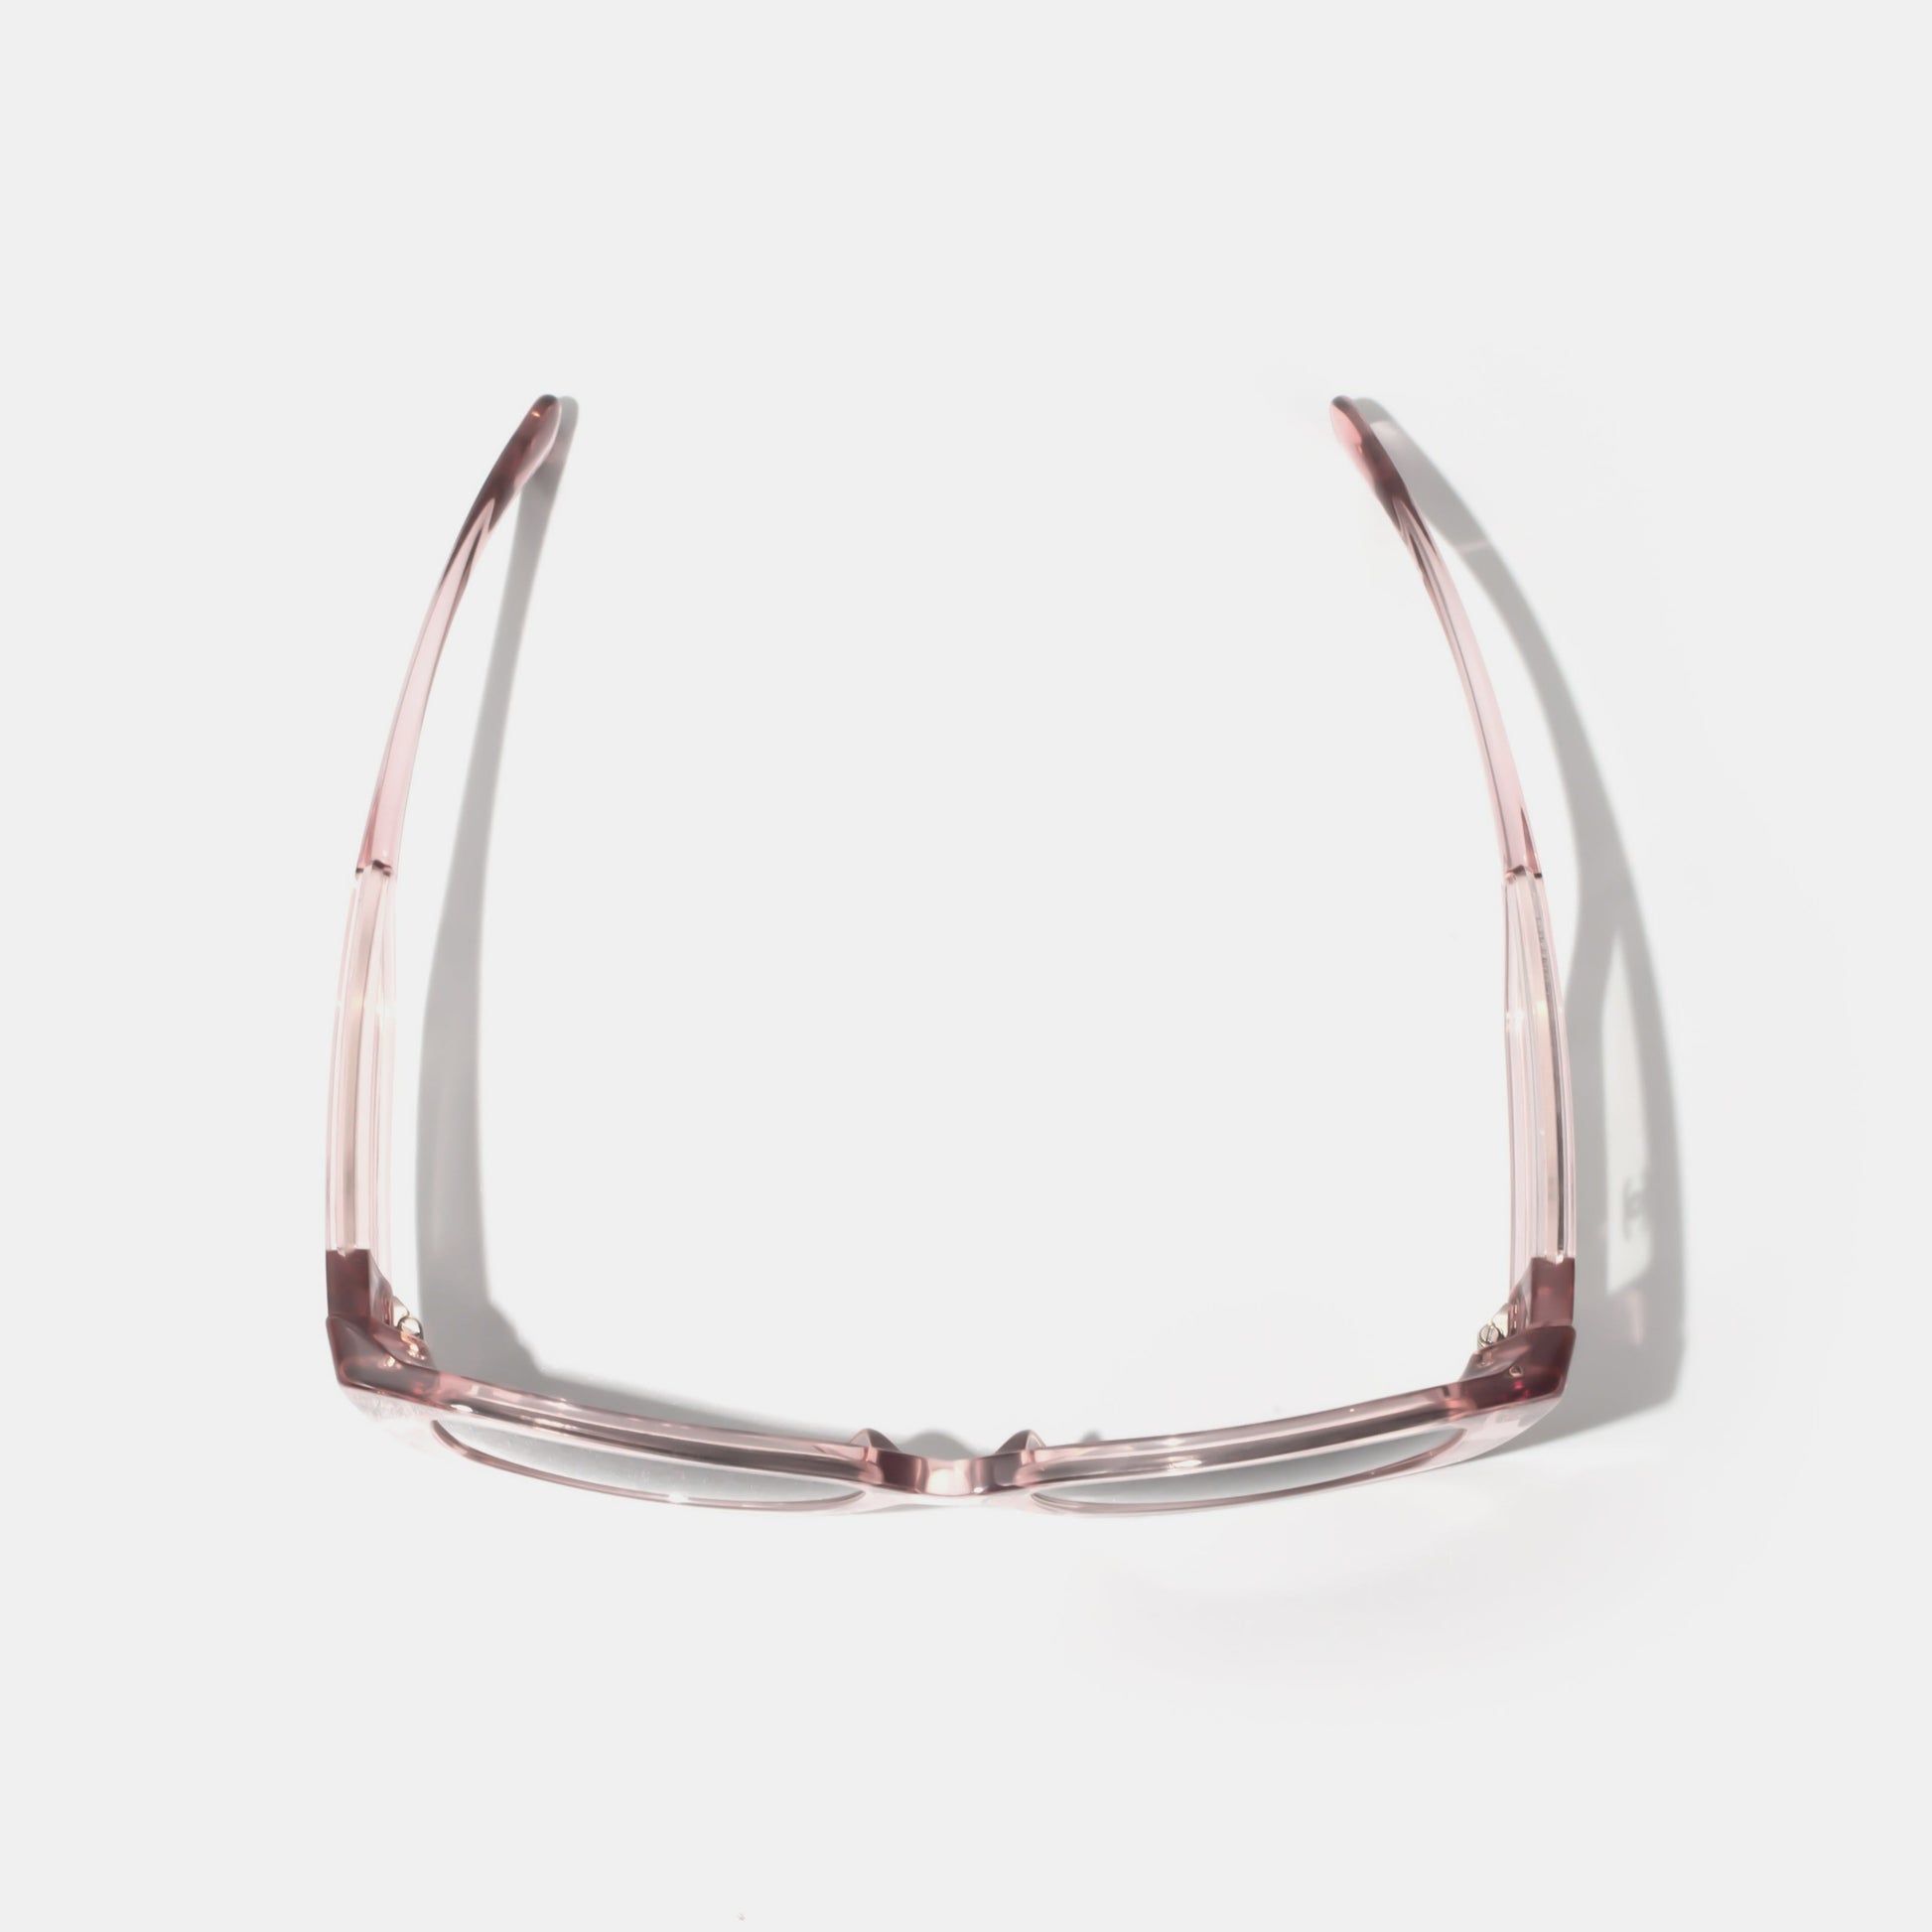 CHANEL Rectangle Transparent Pink Sunglasses CH5430 – BLUYEL